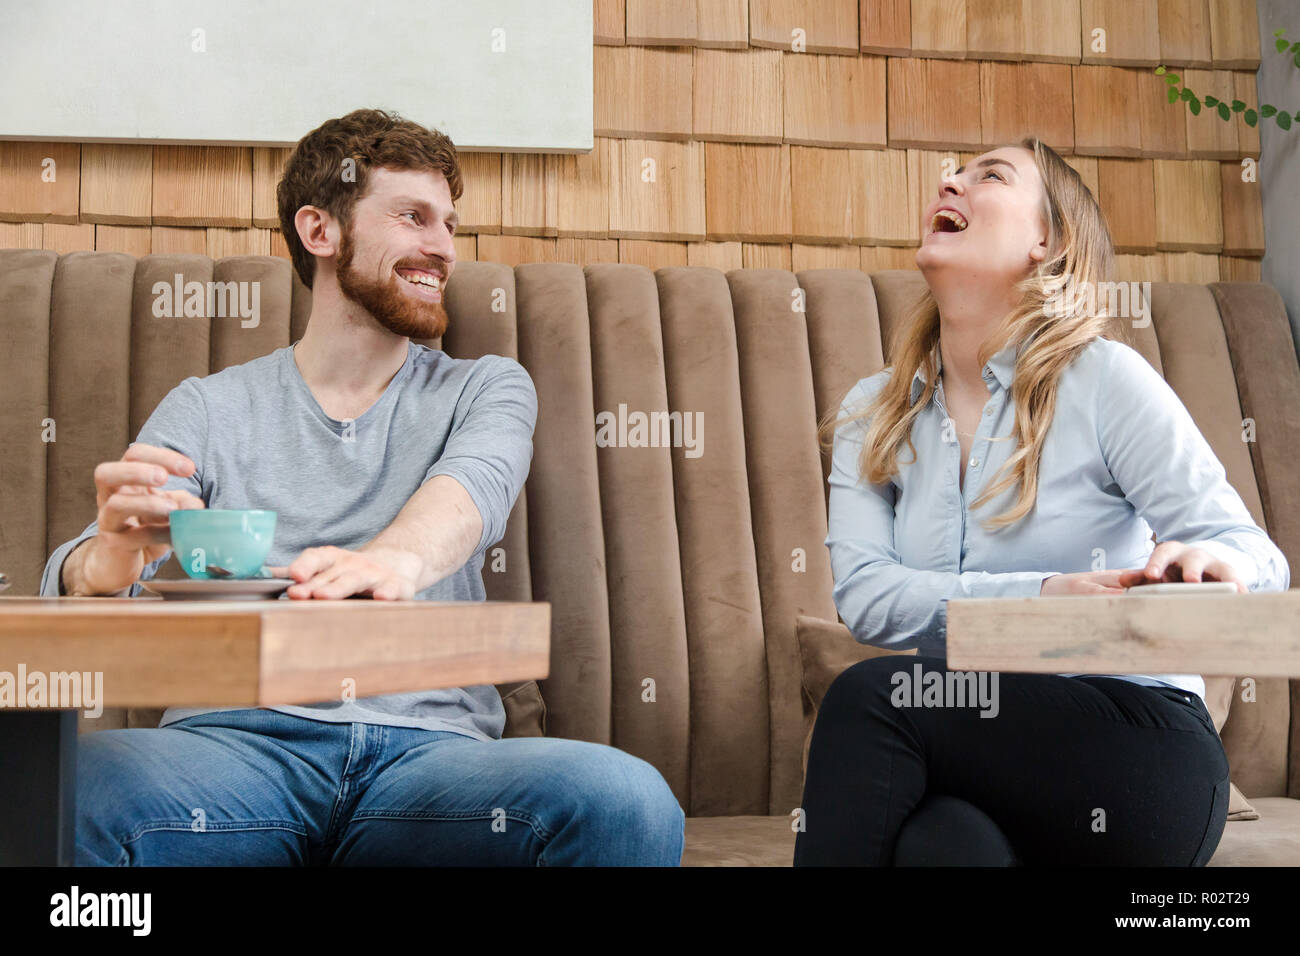 Laughing couple on date in coffee shop Stock Photo